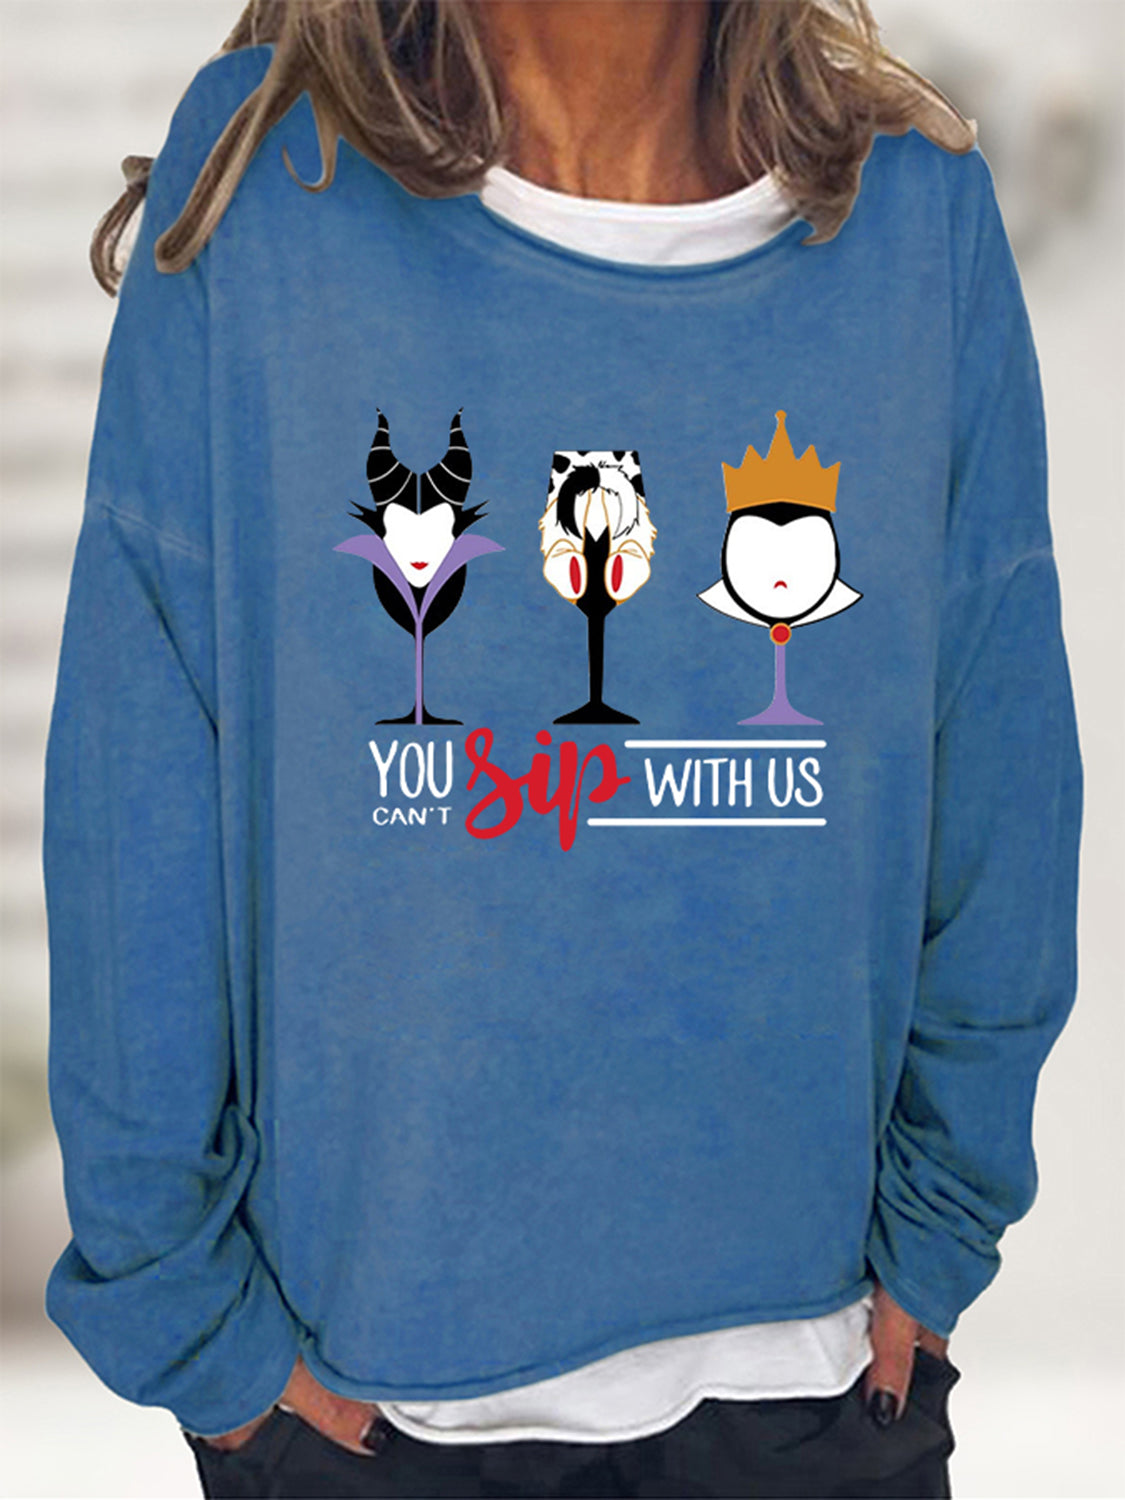 YOU CAN’T SIP WITH US Graphic Sweatshirt - Light Blue / S - T-Shirts - Shirts & Tops - 7 - 2024